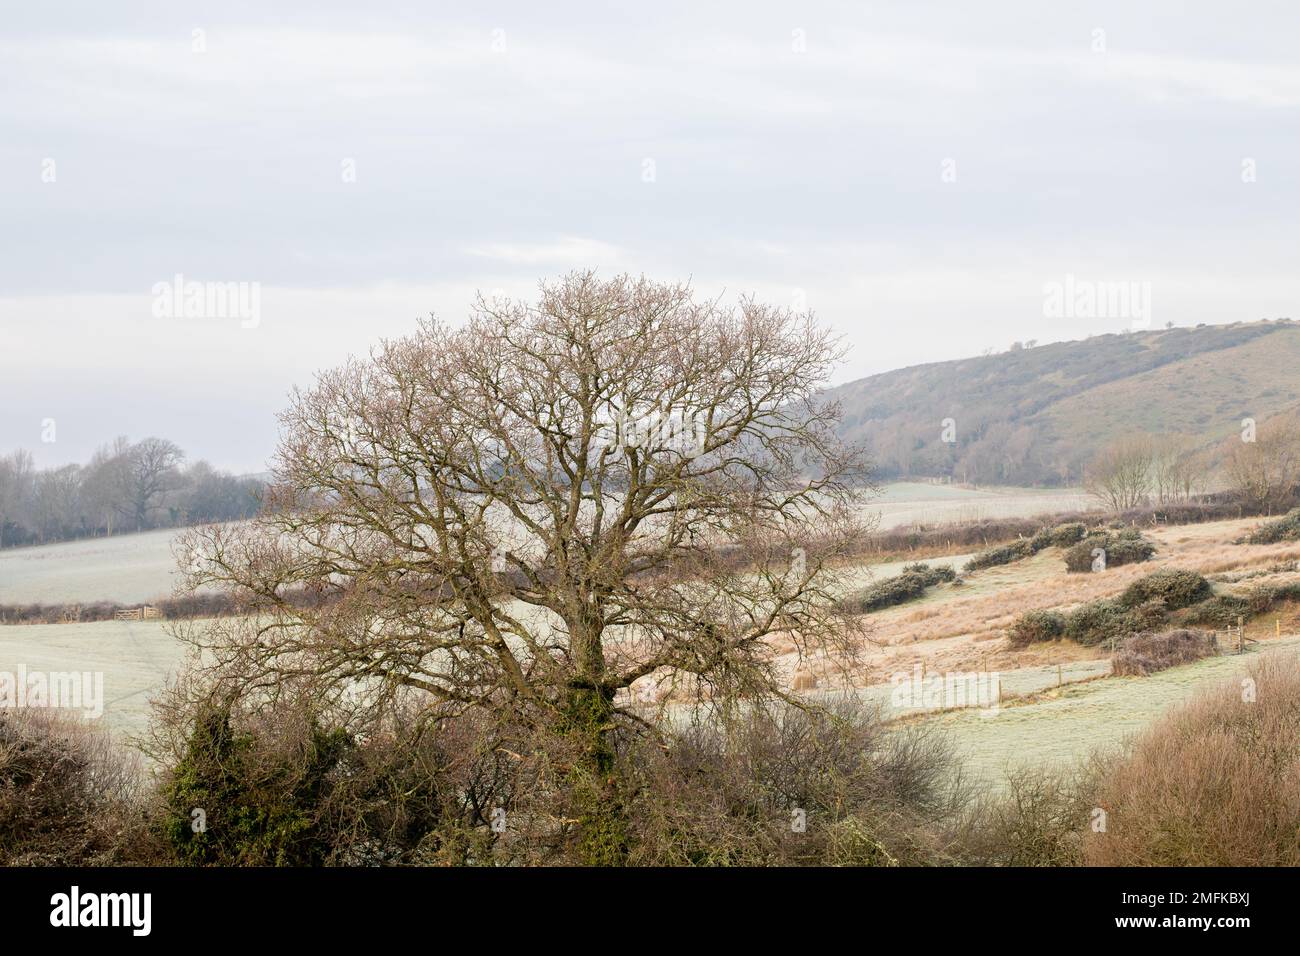 View of trees and hills in rural Dorset on a winters morning Stock Photo